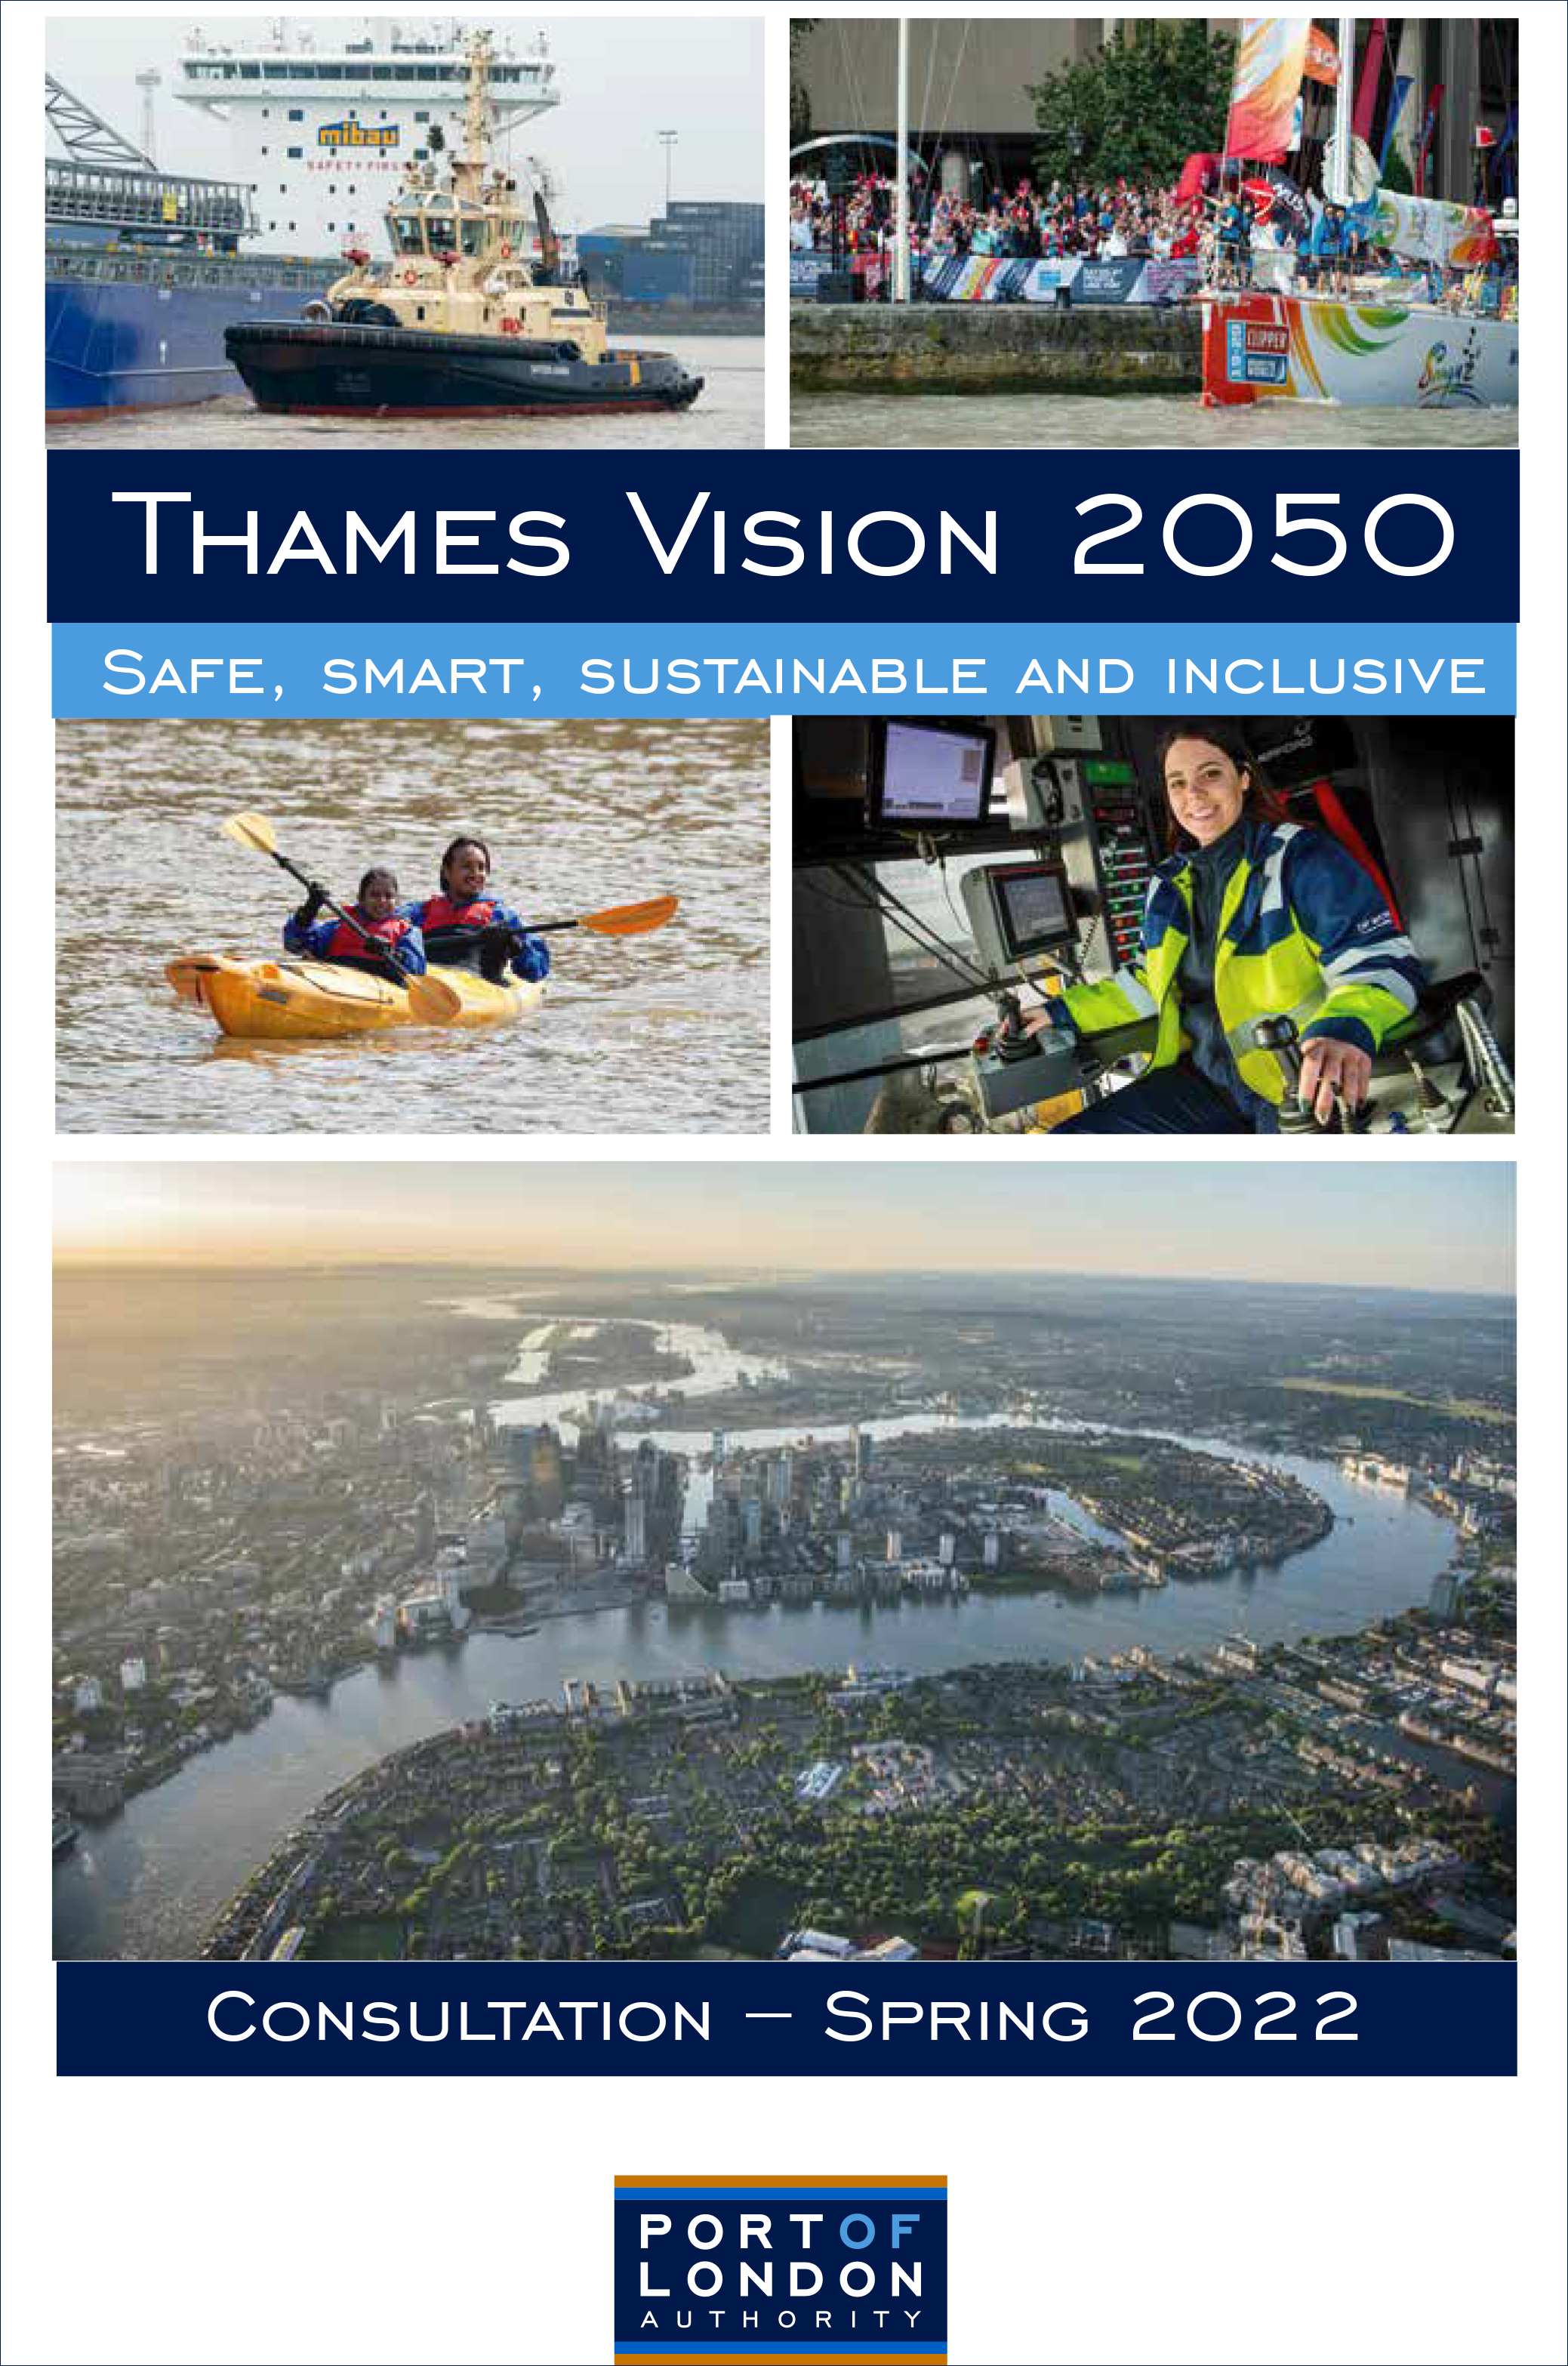 Before proceeding to the consultation questions at the bottom of the page, please review the Thames Vision 2050 draft, created with the feedback from our summer 2021 initial stakeholder consultation